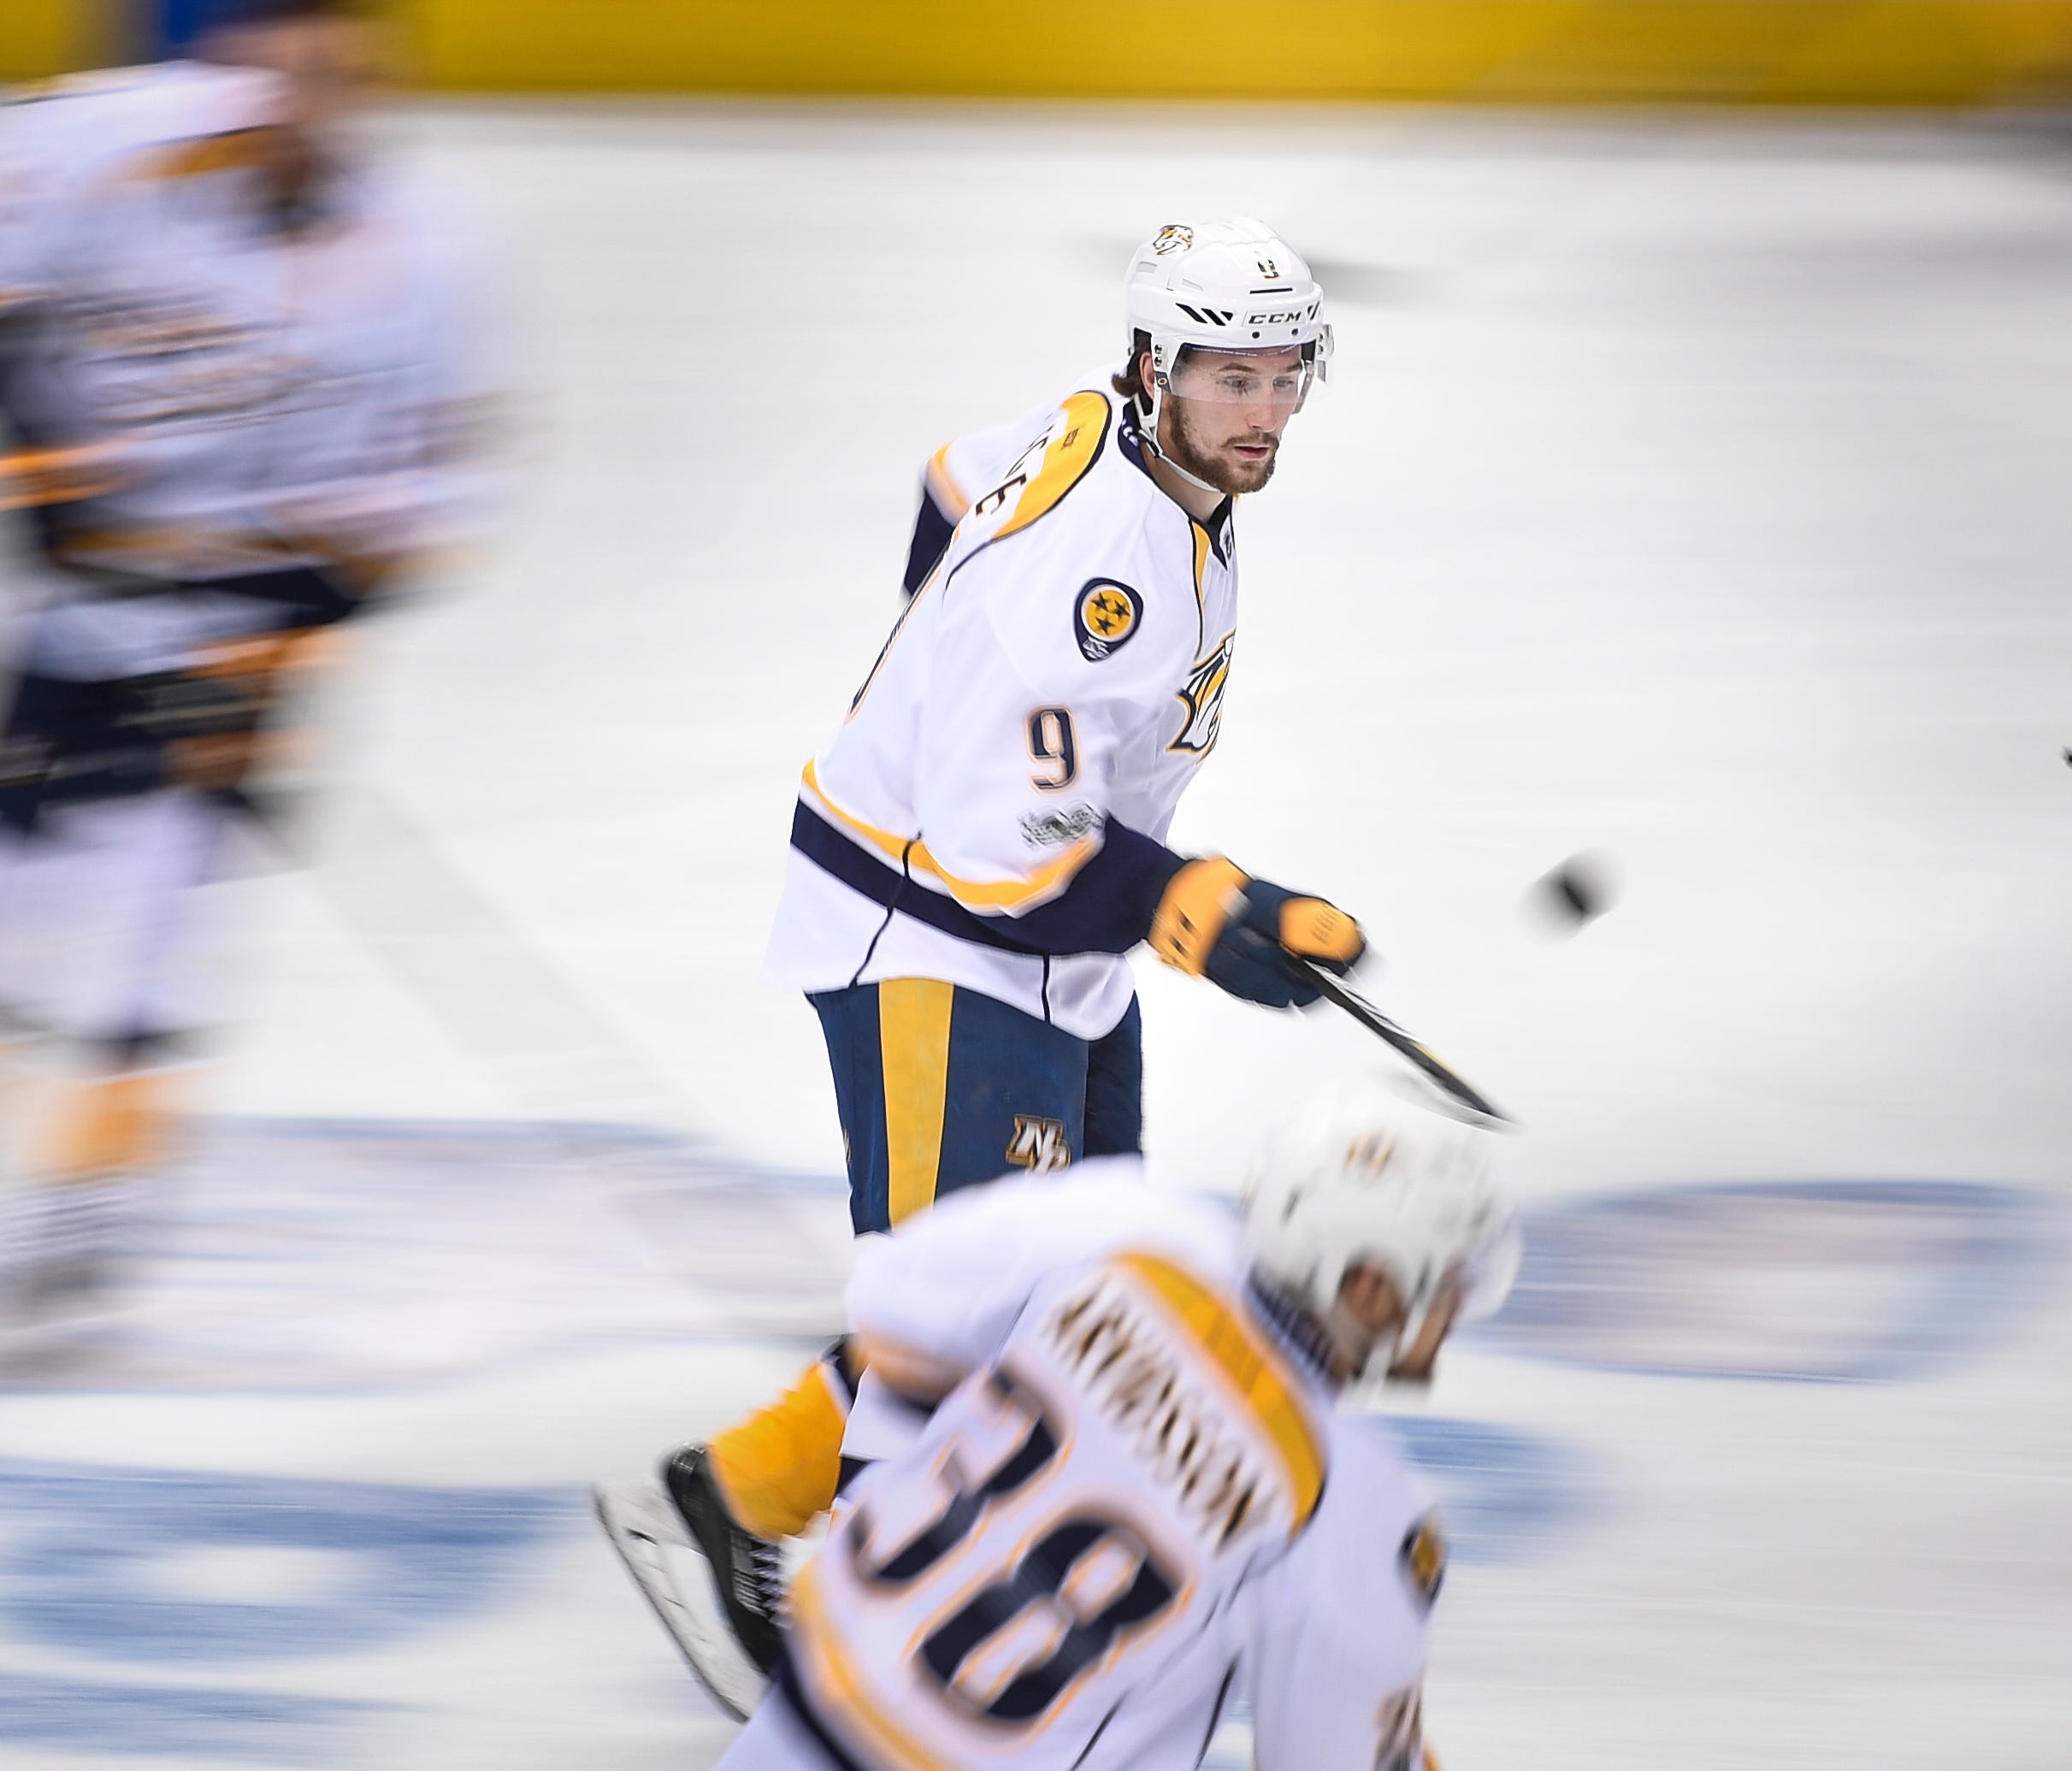 Nashville Predators left wing Filip Forsberg (9) skates across the ice with the puck as he warms up before game 1 of the Western Conference finals against the Anaheim Ducks at the Honda Center in Anaheim, Calif., Friday, May 12, 2017.